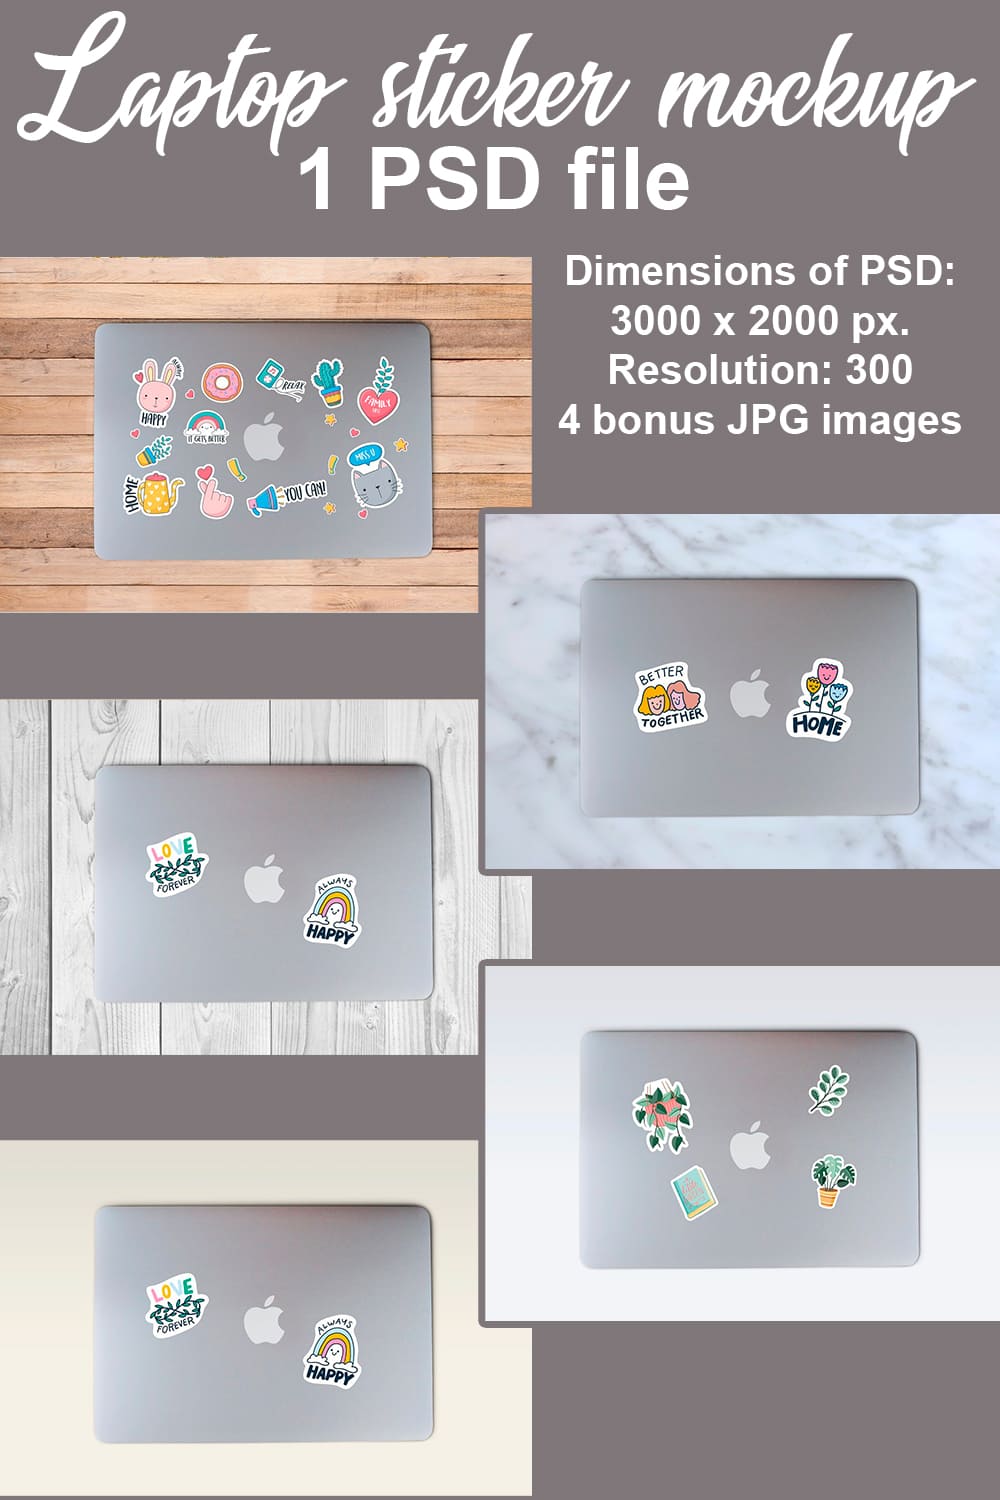 Collection of laptop images with great stickers.